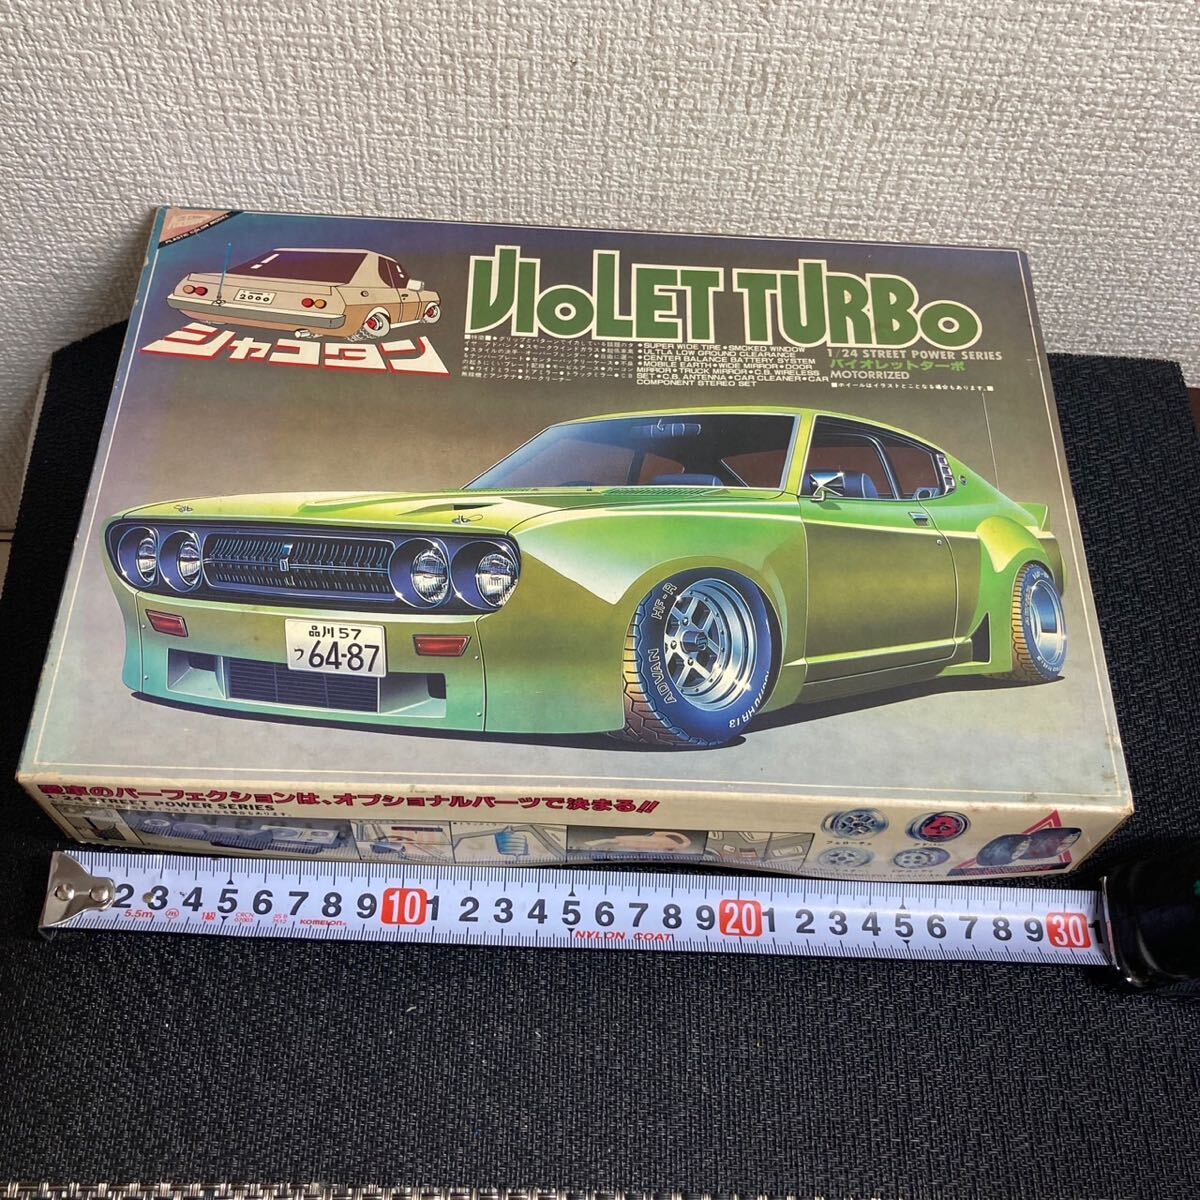  free shipping / not yet constructed storage goods /nichimo/ plastic model / lowrider Nissan violet turbo /VIOLET TURBO/ present condition goods 